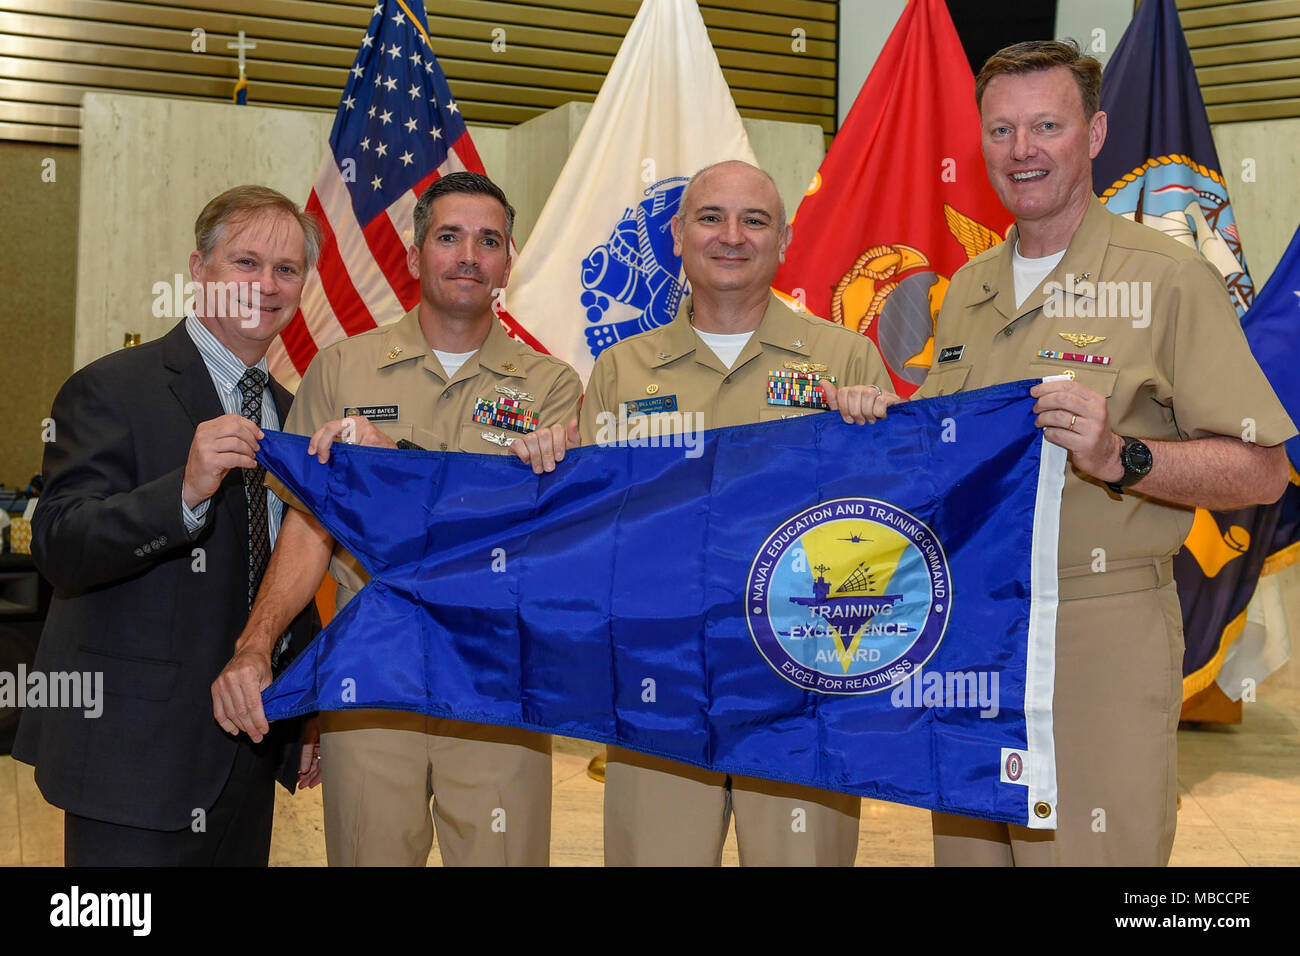 Fla. (Feb. 20, 2018) Rear Adm. Kyle Cozad (far right), commander, Naval Education and Training Command (NETC), presents the 2017 NETC Training Excellence Award blue burgee to Capt. Bill Lintz (second from right), commanding officer, Center for Information Warfare Training (CIWT). CIWT won the overall Training Excellence White 'T' award, all nine functional area awards and is authorized to display the burgee throughout 2018. Also pictured are John Jones, NETC’s executive director (far left), and CIWT Command Master Chief Mike Bates (second from left). (U.S. Navy Stock Photo